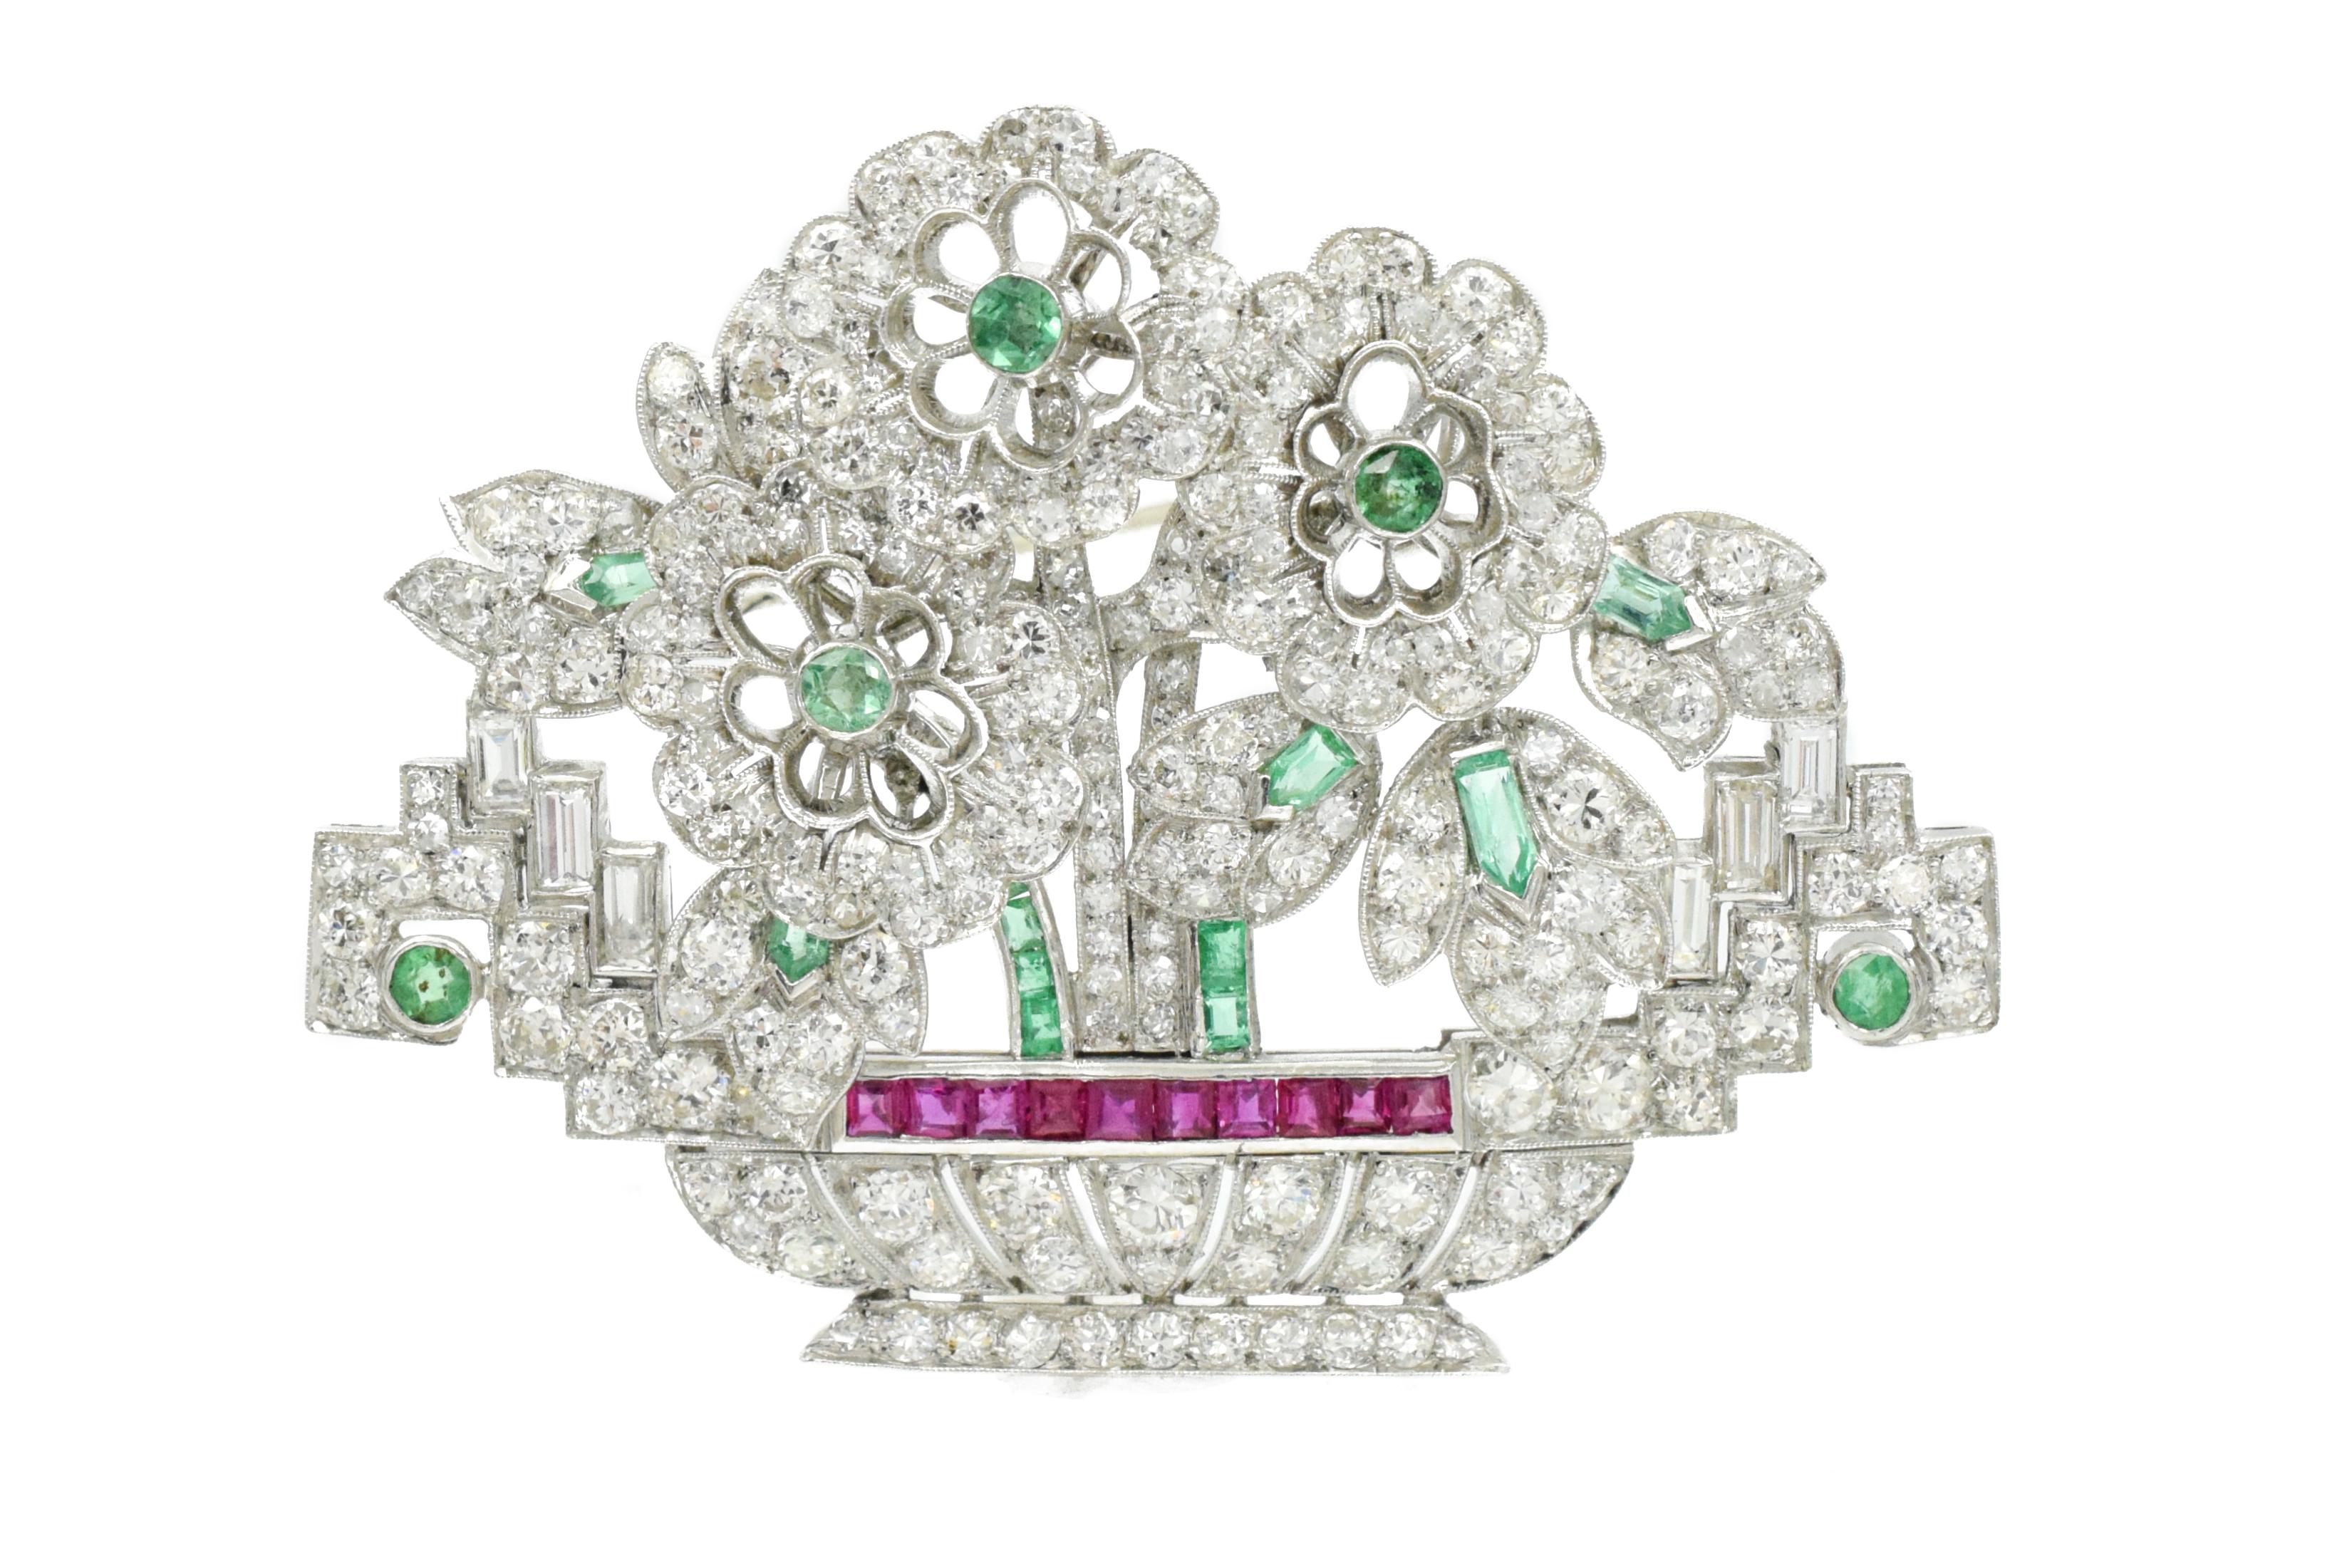 Beautiful art deco brooch with three flowers in the basket encrusted with diamonds .
Estimated total weight of the diamonds is 5 carat
Emeralds are 1.00carat
Rubies are     1.00carat
Platinum;
Measurements: 2.2